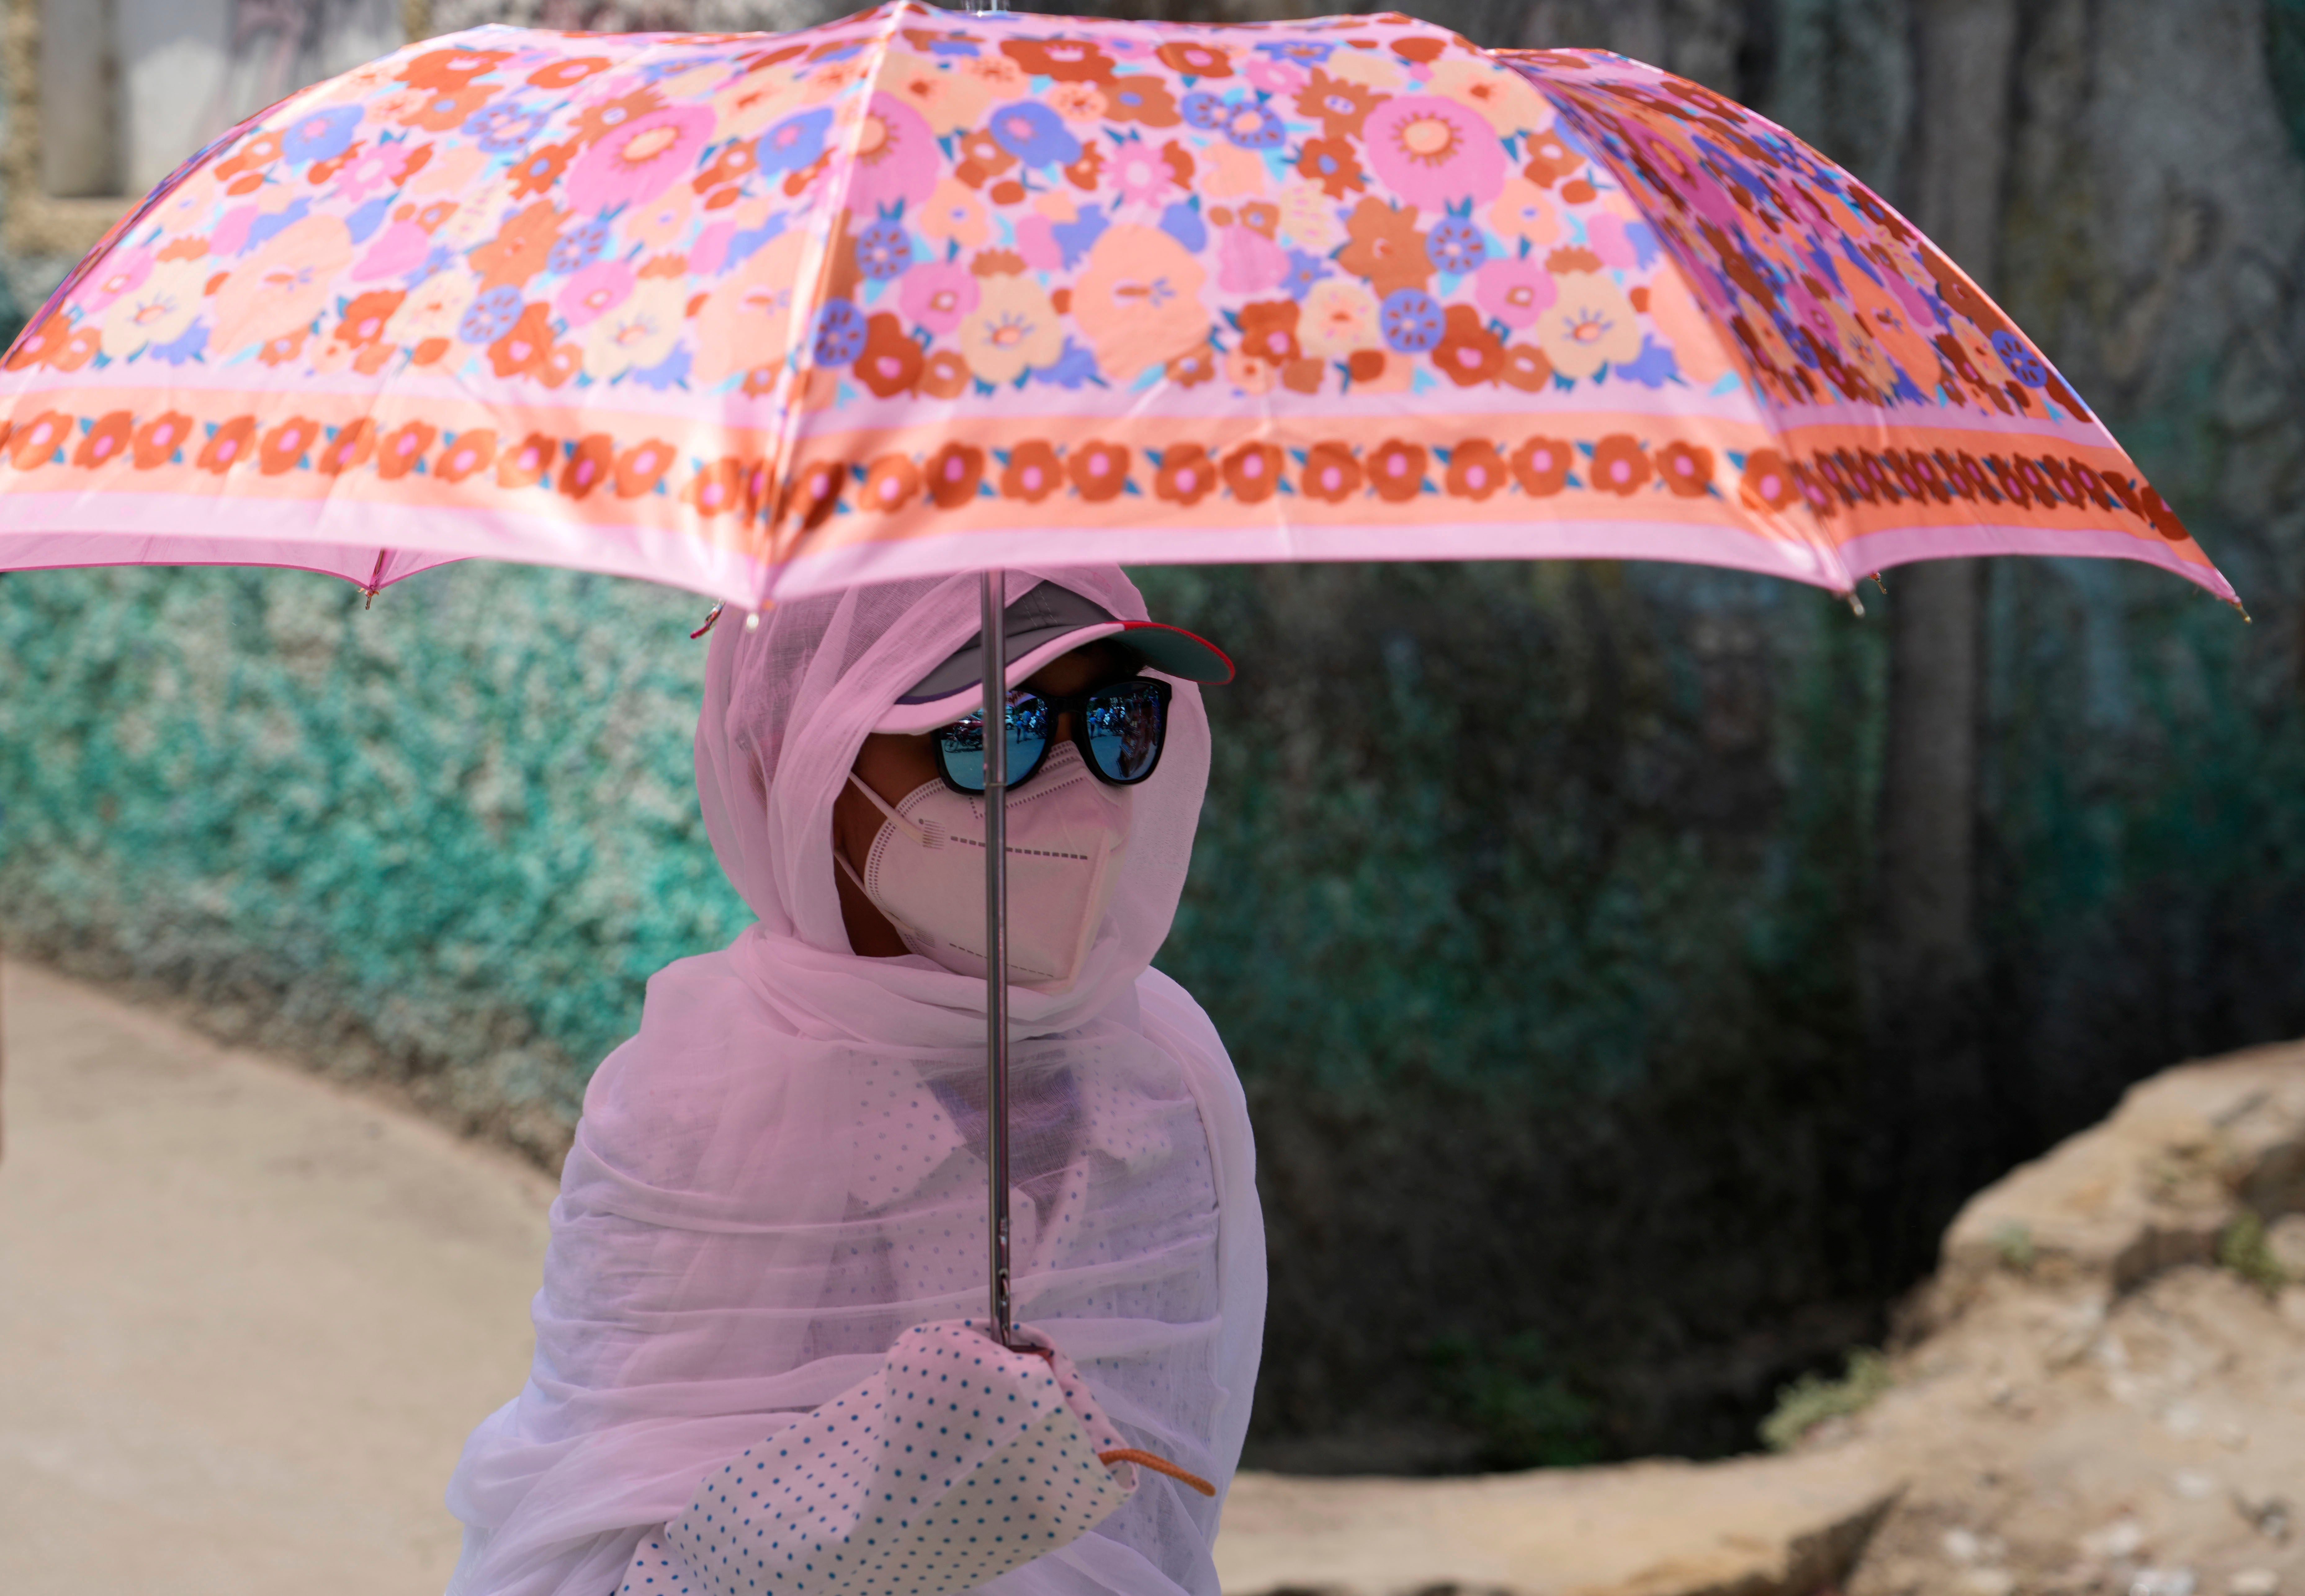 A schoolgirl protects herself from the sun in Prayagraj, in the northern Indian state of Uttar Pradesh.